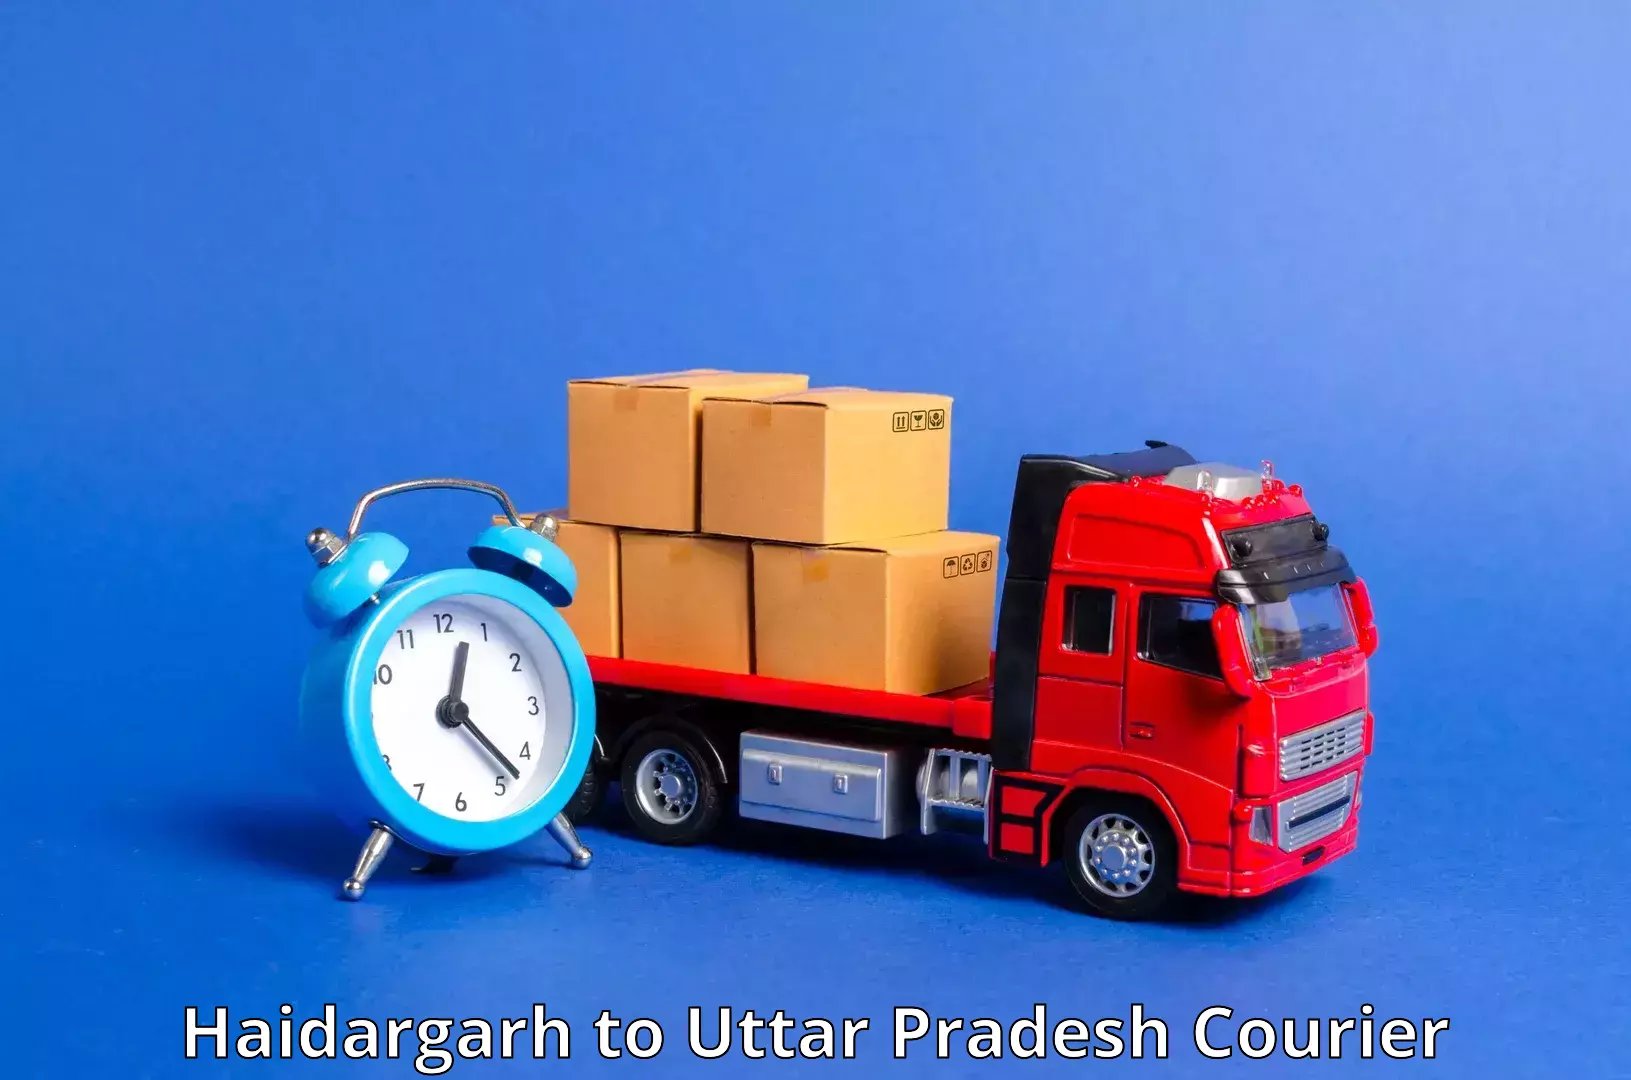 Personalized courier solutions Haidargarh to Lal Gopalganj